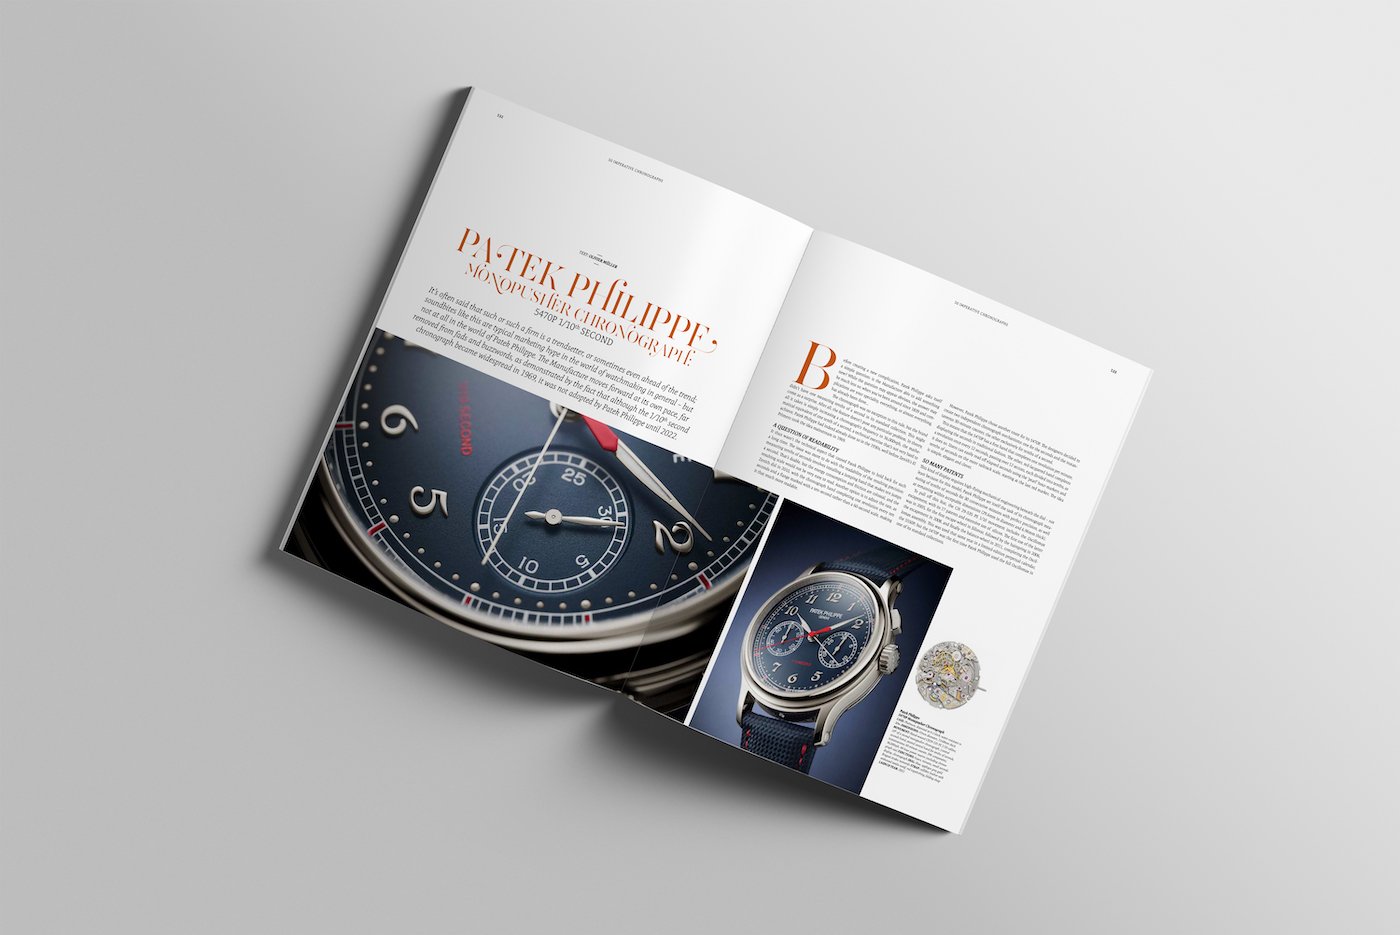 The Millennium Watch Book: Chronographs set for November release